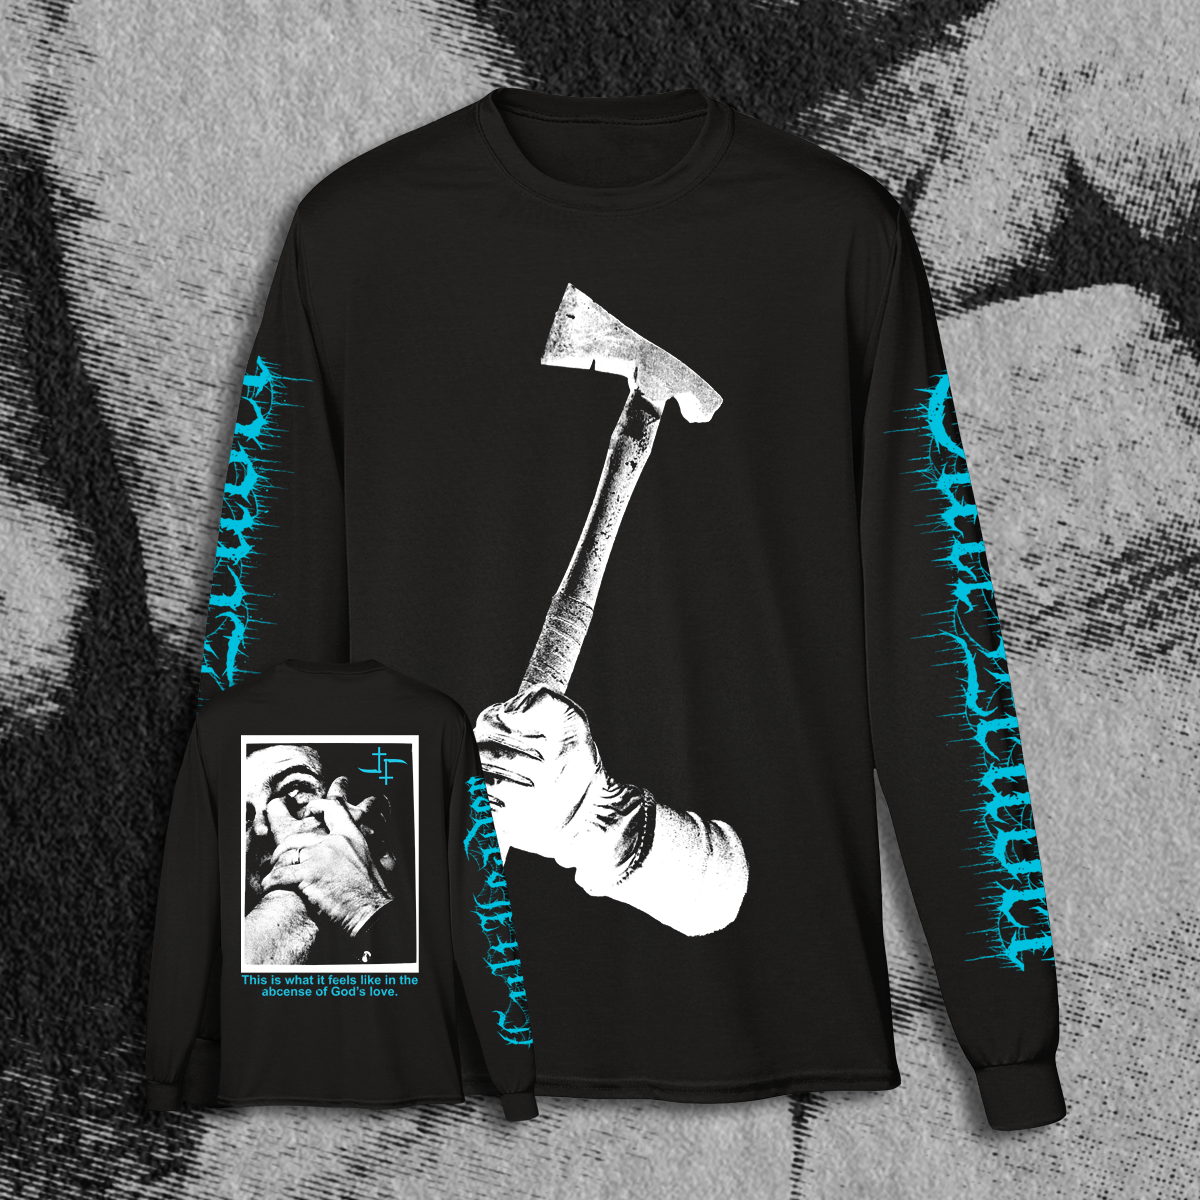 CULT LEADER "THIS IS WHAT IT FEELS LIKE" LONG SLEEVE SHIRT